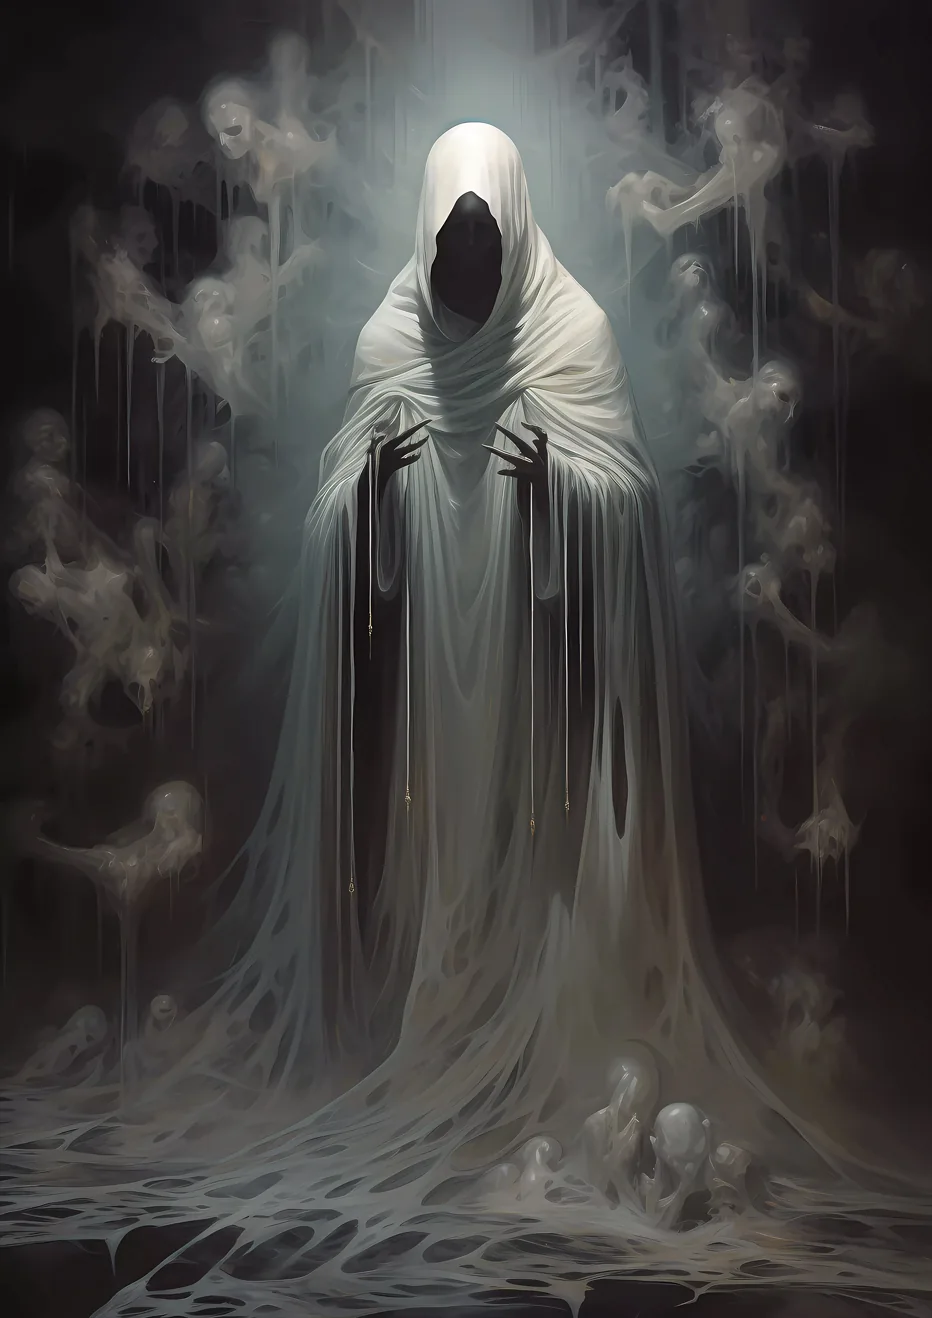 Echoes of Tormented Souls: In the centre of the image, a figure draped in a silk-smooth white robe stands amidst swirling pale white souls, with darkness surrounding them.